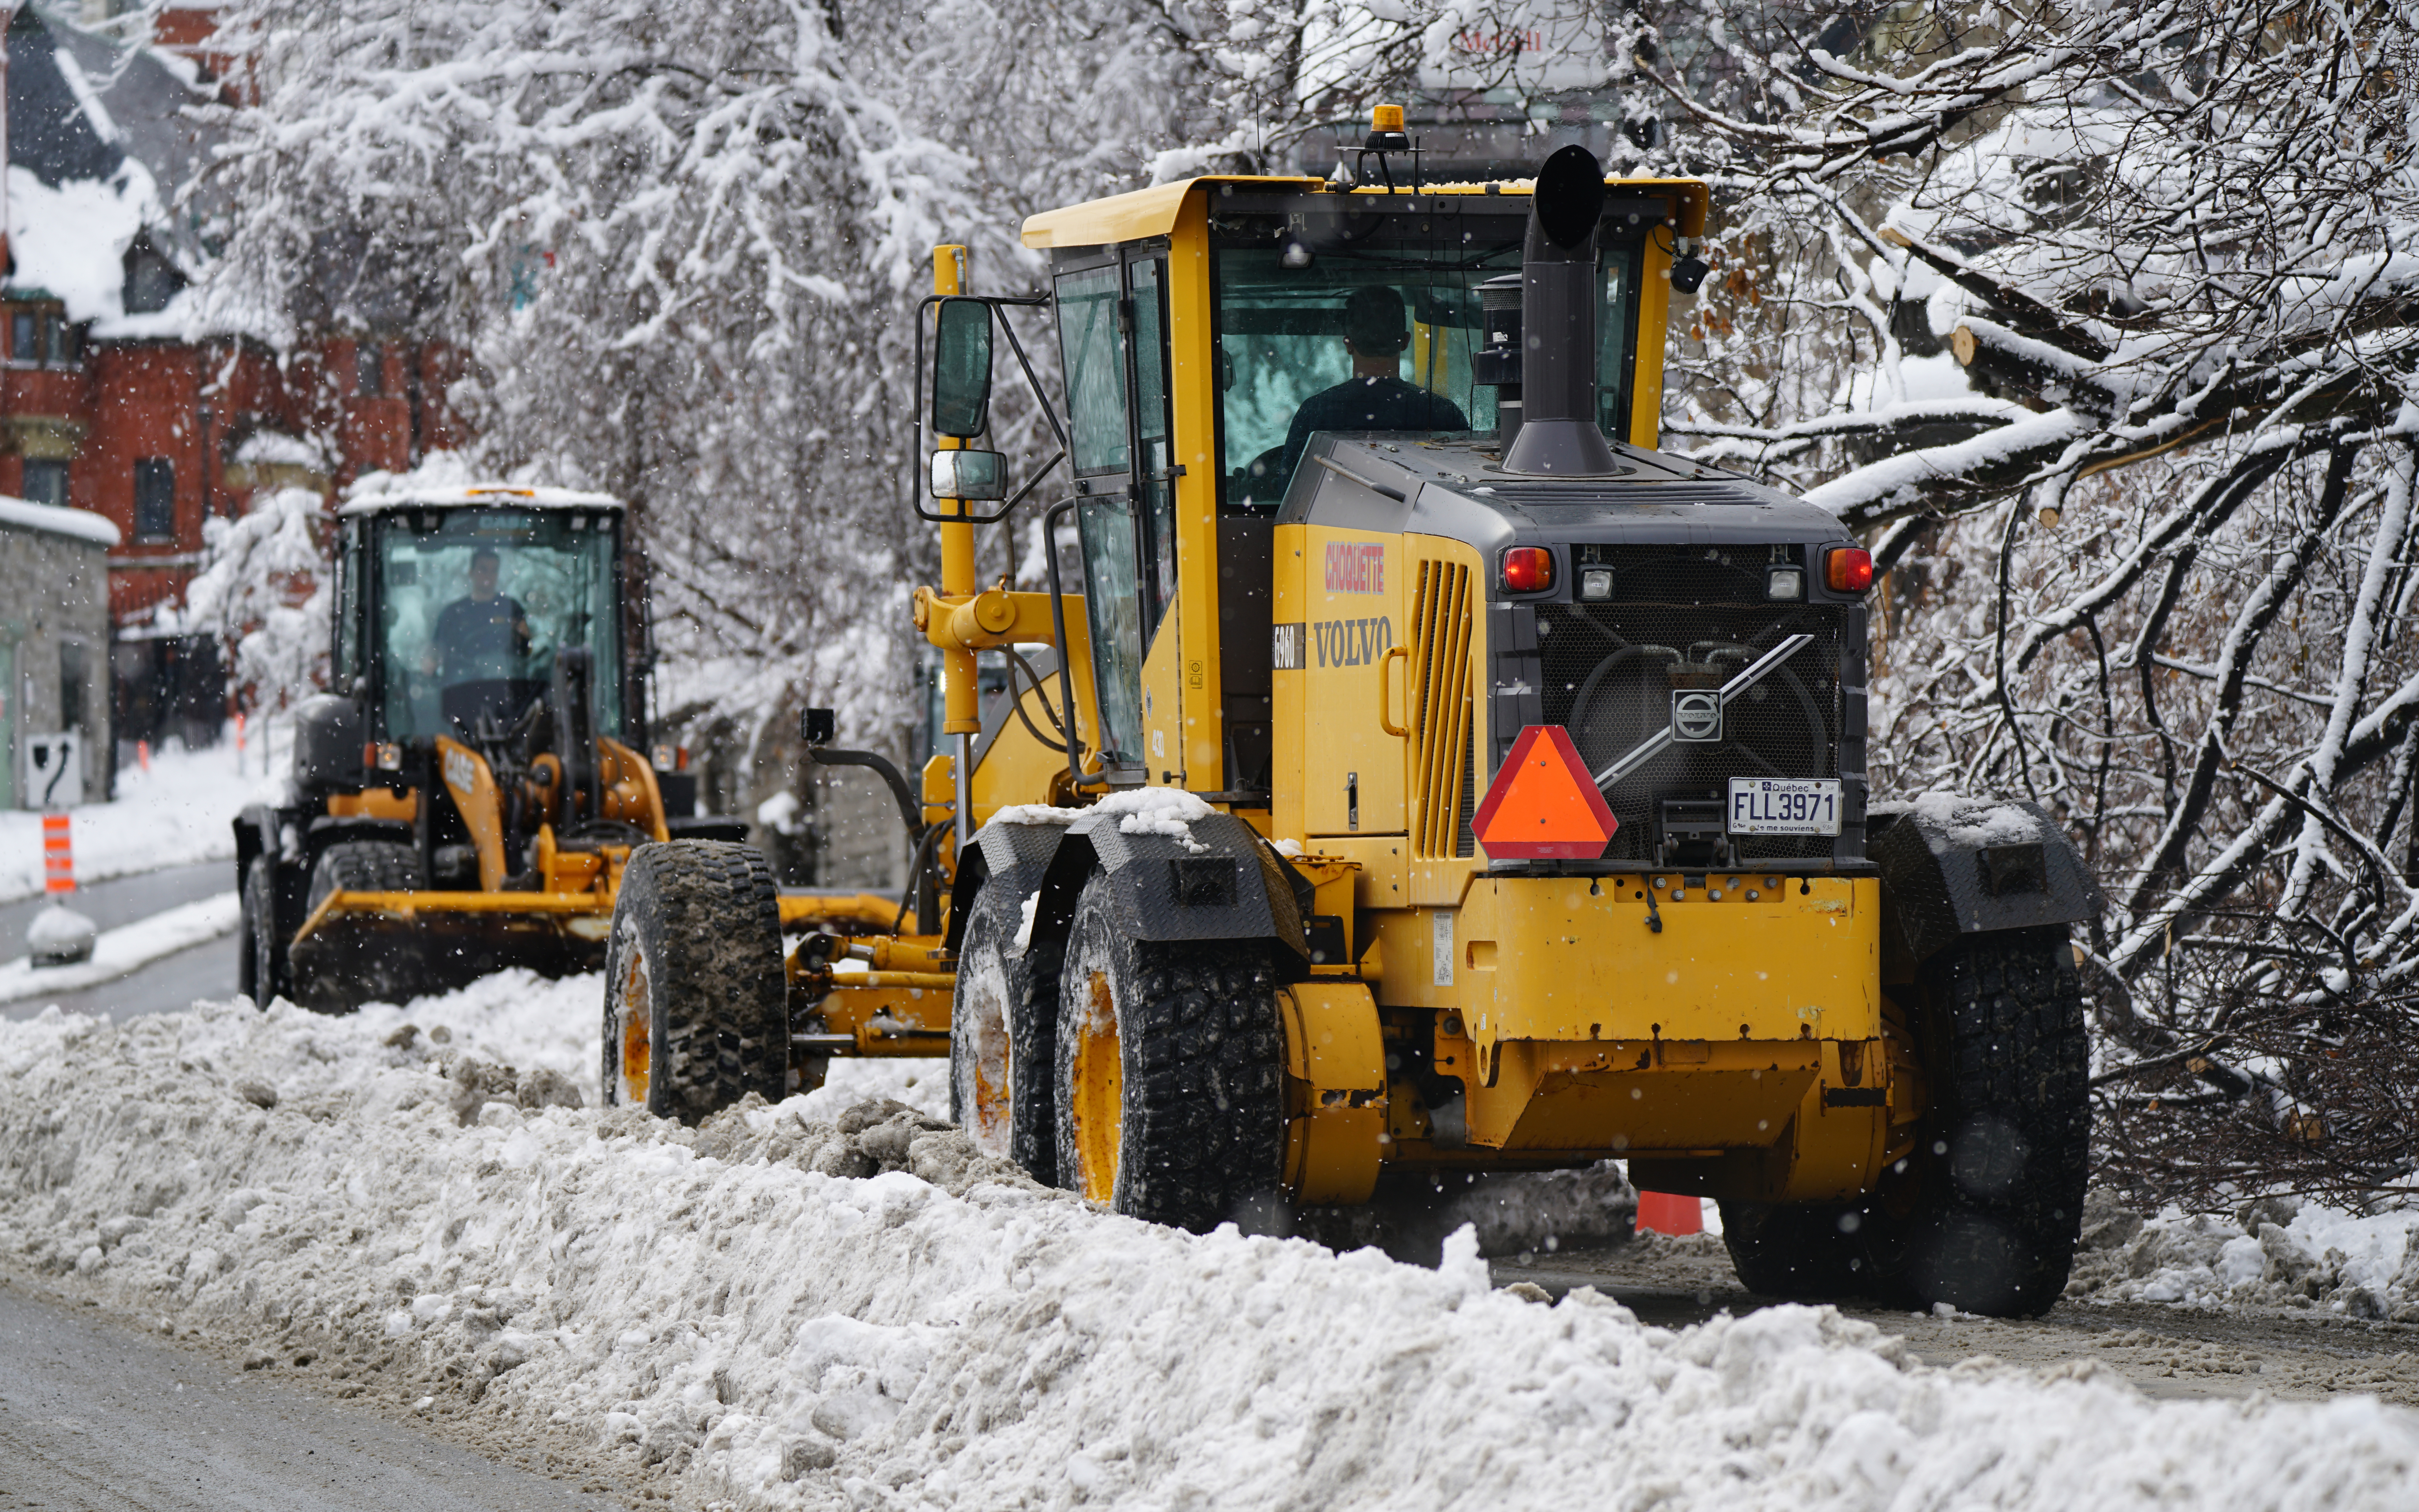 Montreal to spend nearly $200M on snow removal this winter